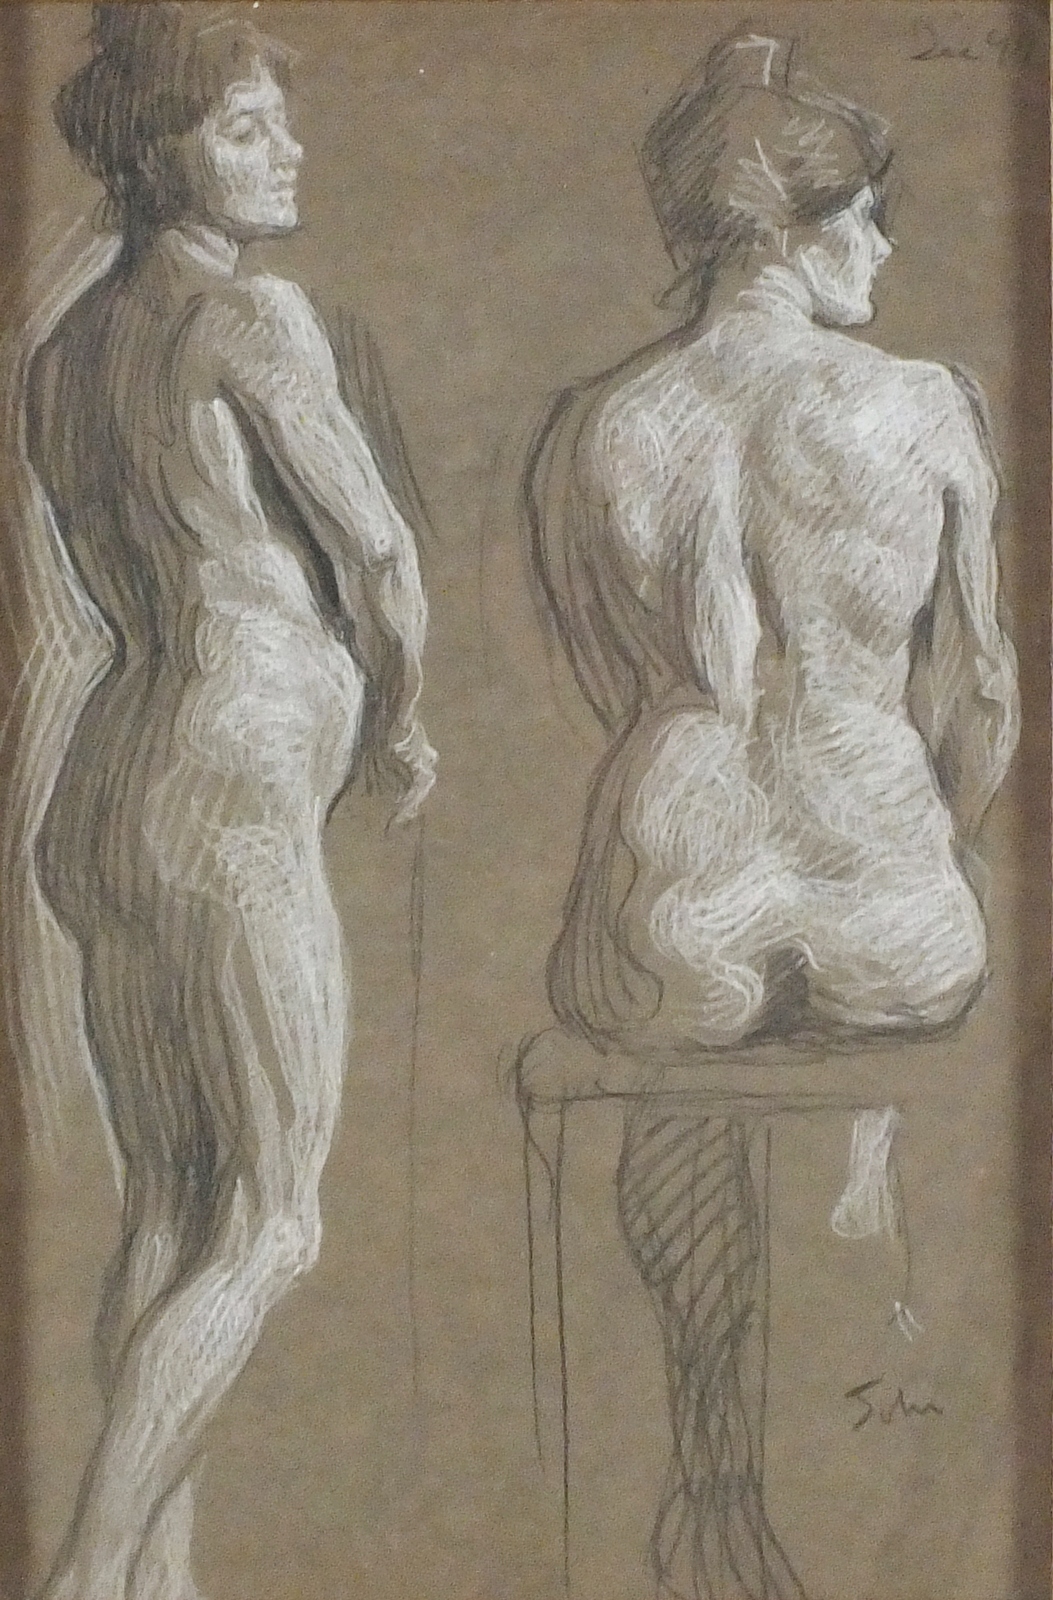 †Augustus Edwin JOHN (1878-1961), Pencil & chalk, Two Studies of a Female Nude, Signed & dated